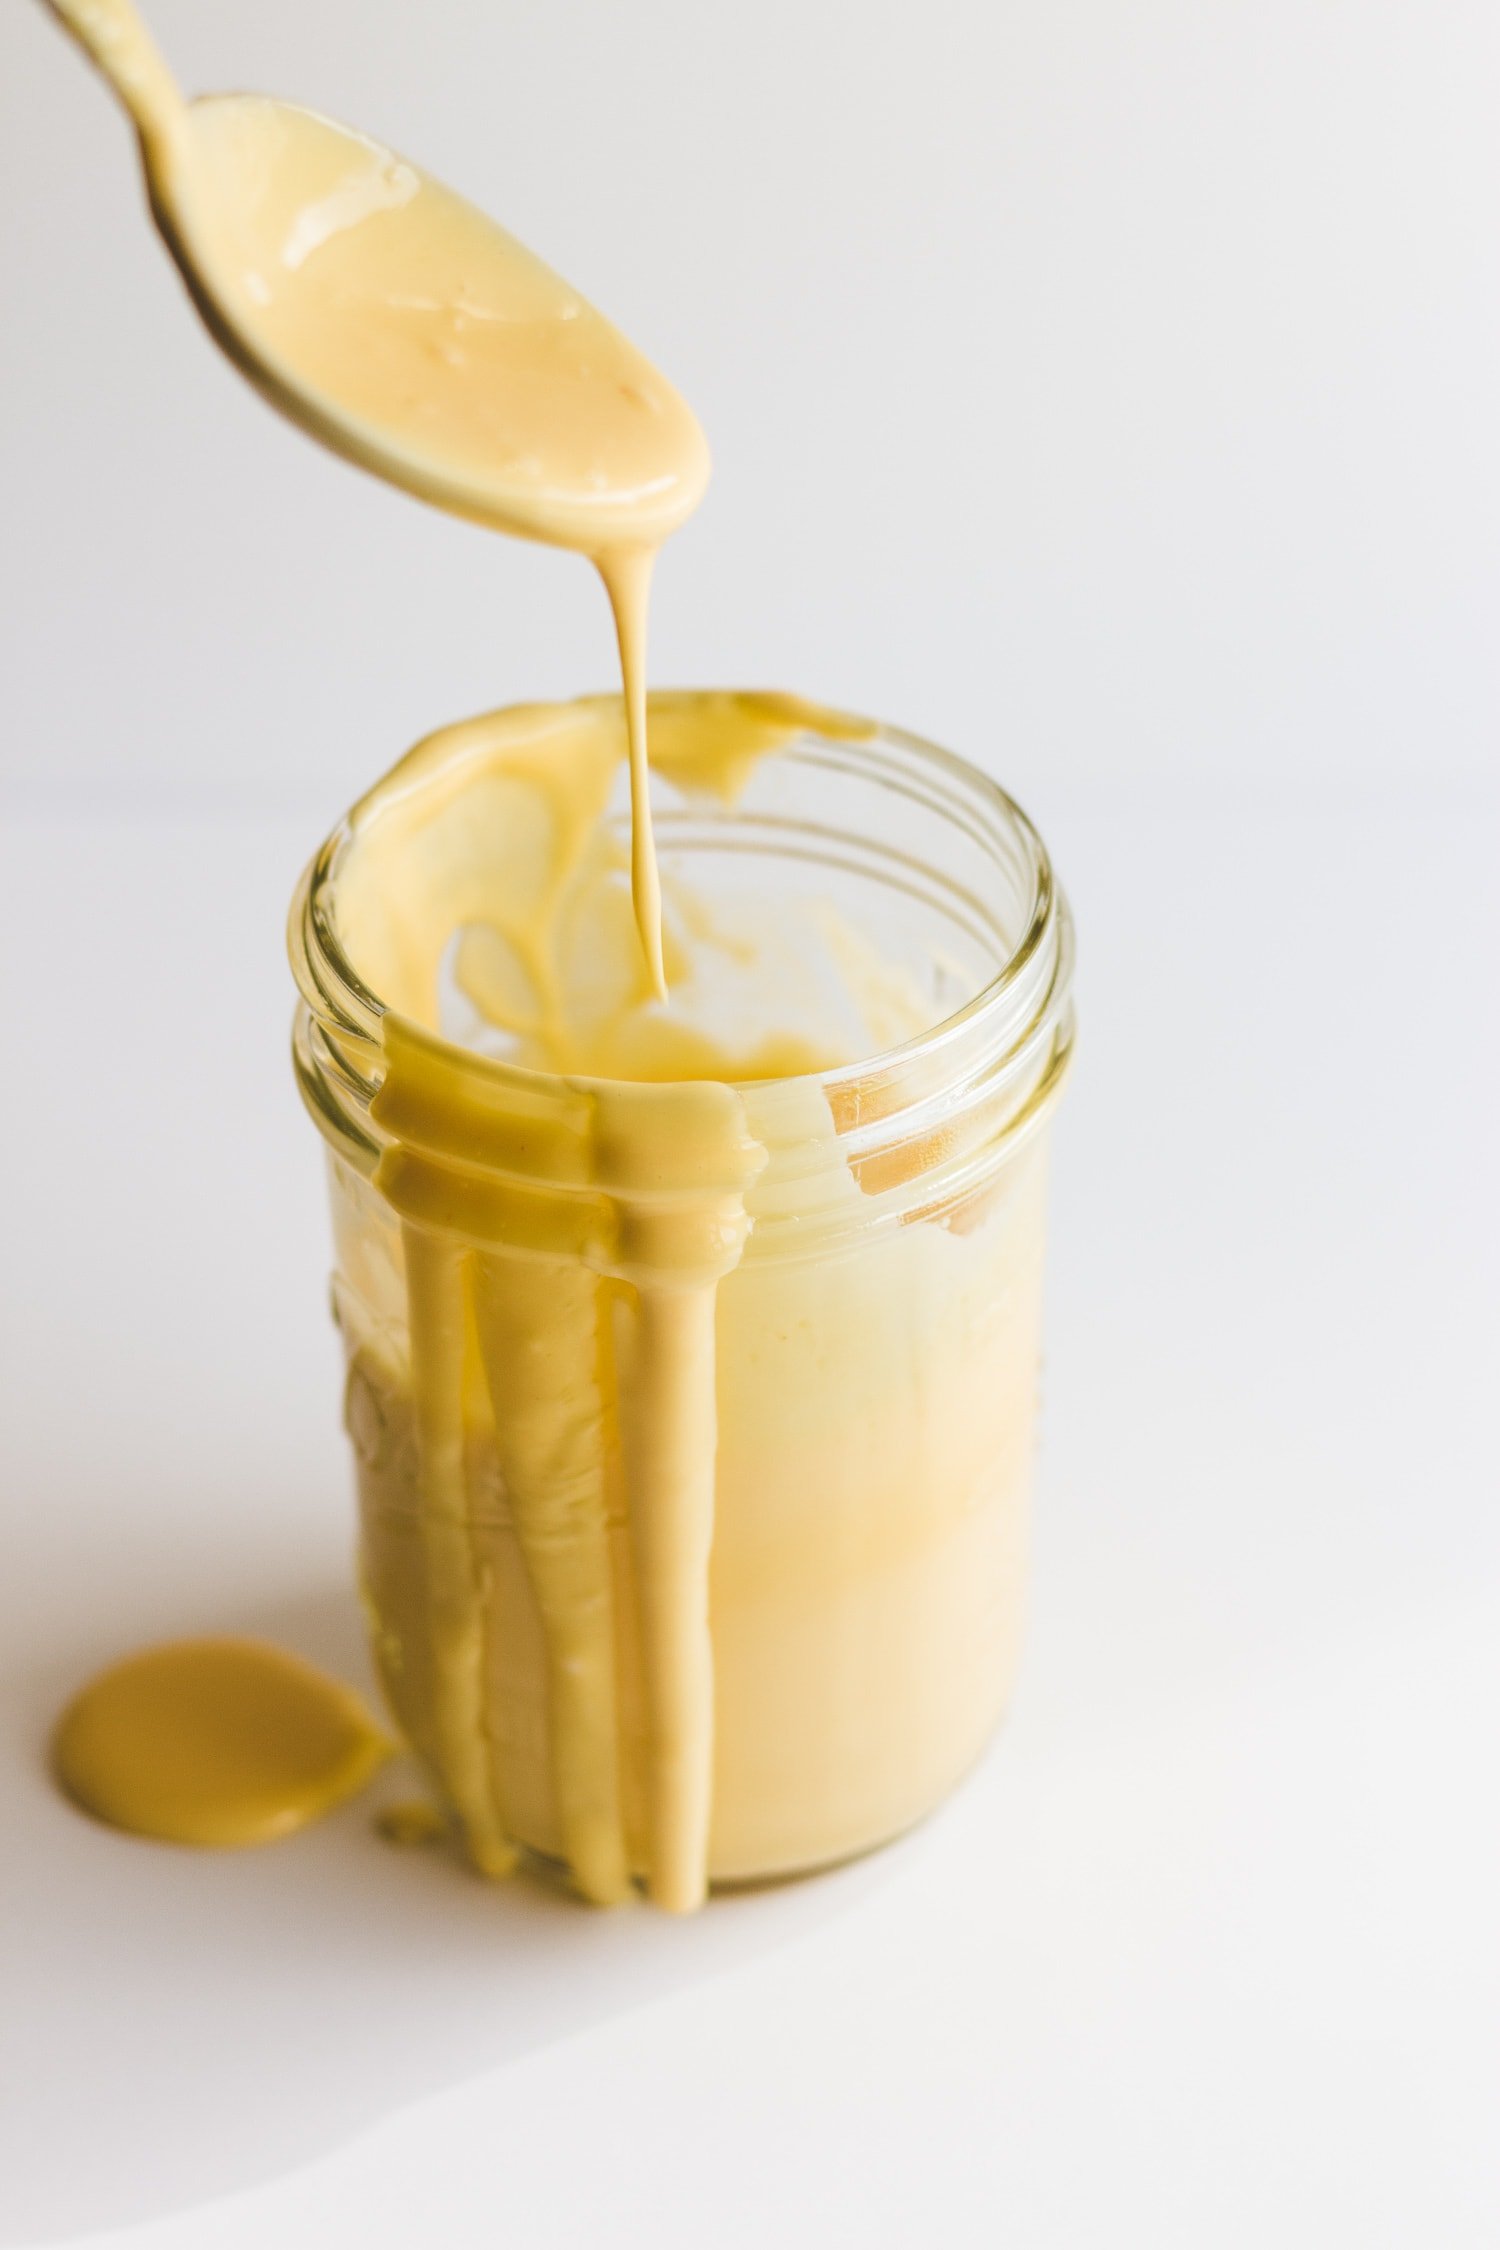 hollandaise sauce dripping off of a spoon into a mason jar filled with sauce